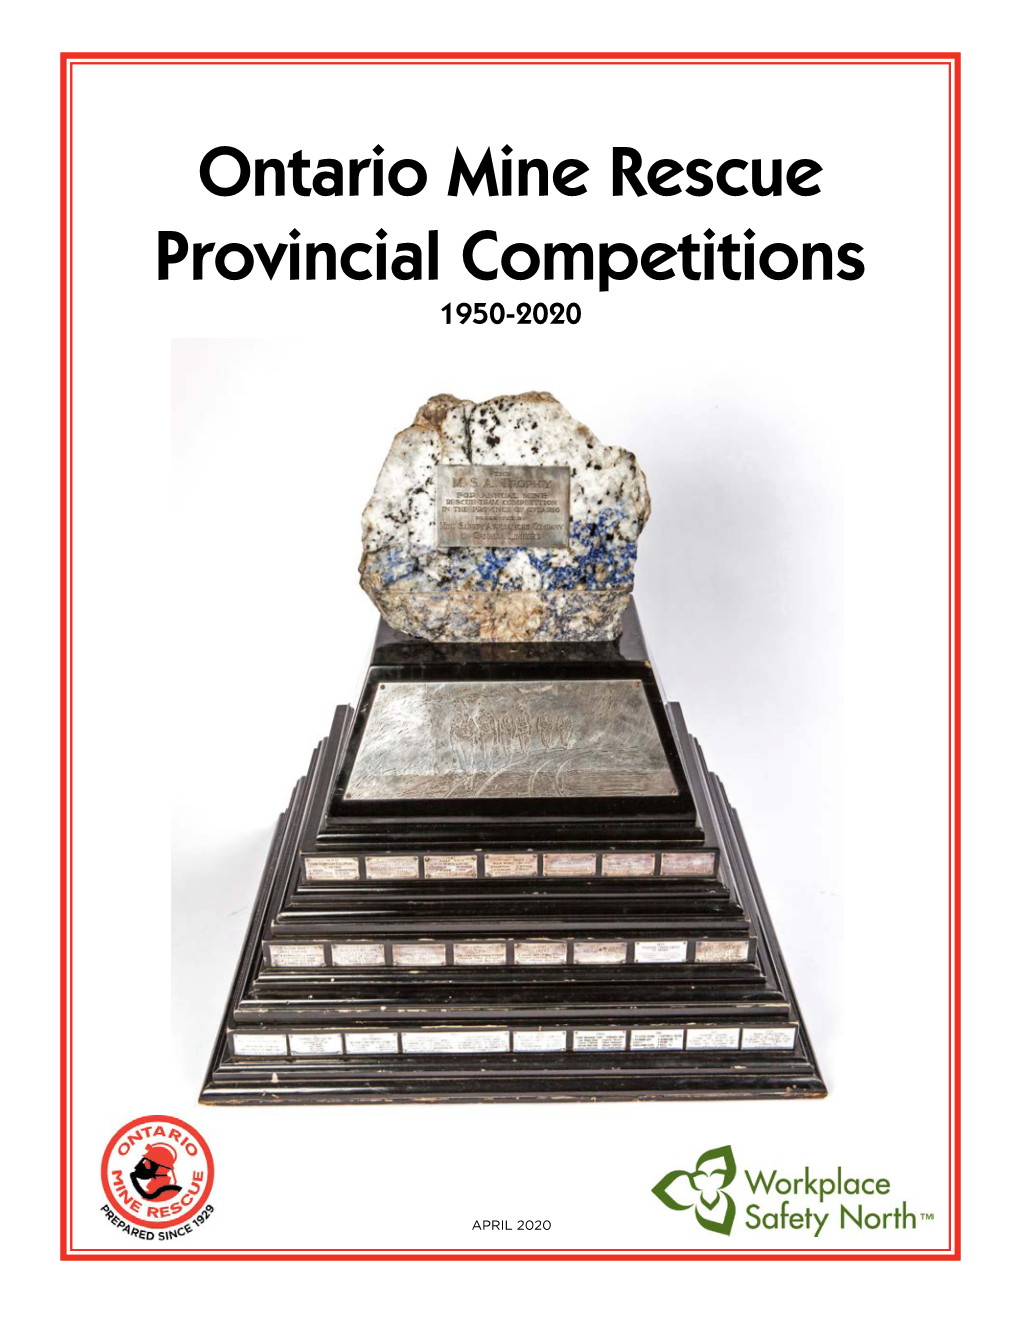 Ontario Mine Rescue Provincial Competitions 1950-2020